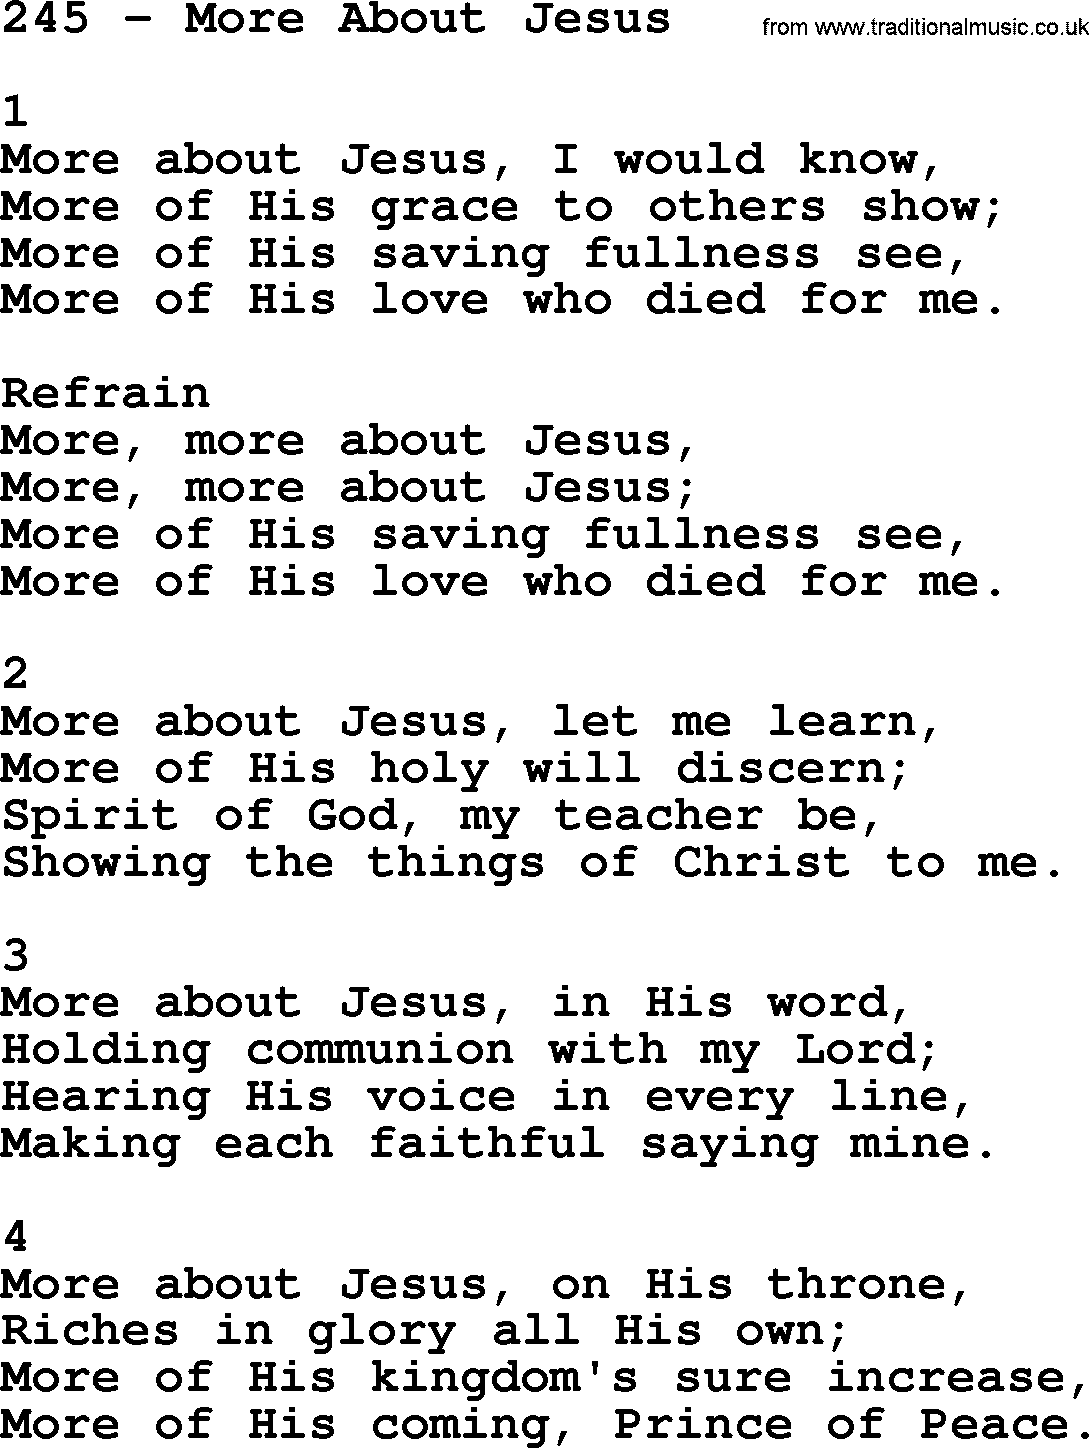 Complete Adventis Hymnal, title: 245-More About Jesus, with lyrics, midi, mp3, powerpoints(PPT) and PDF,